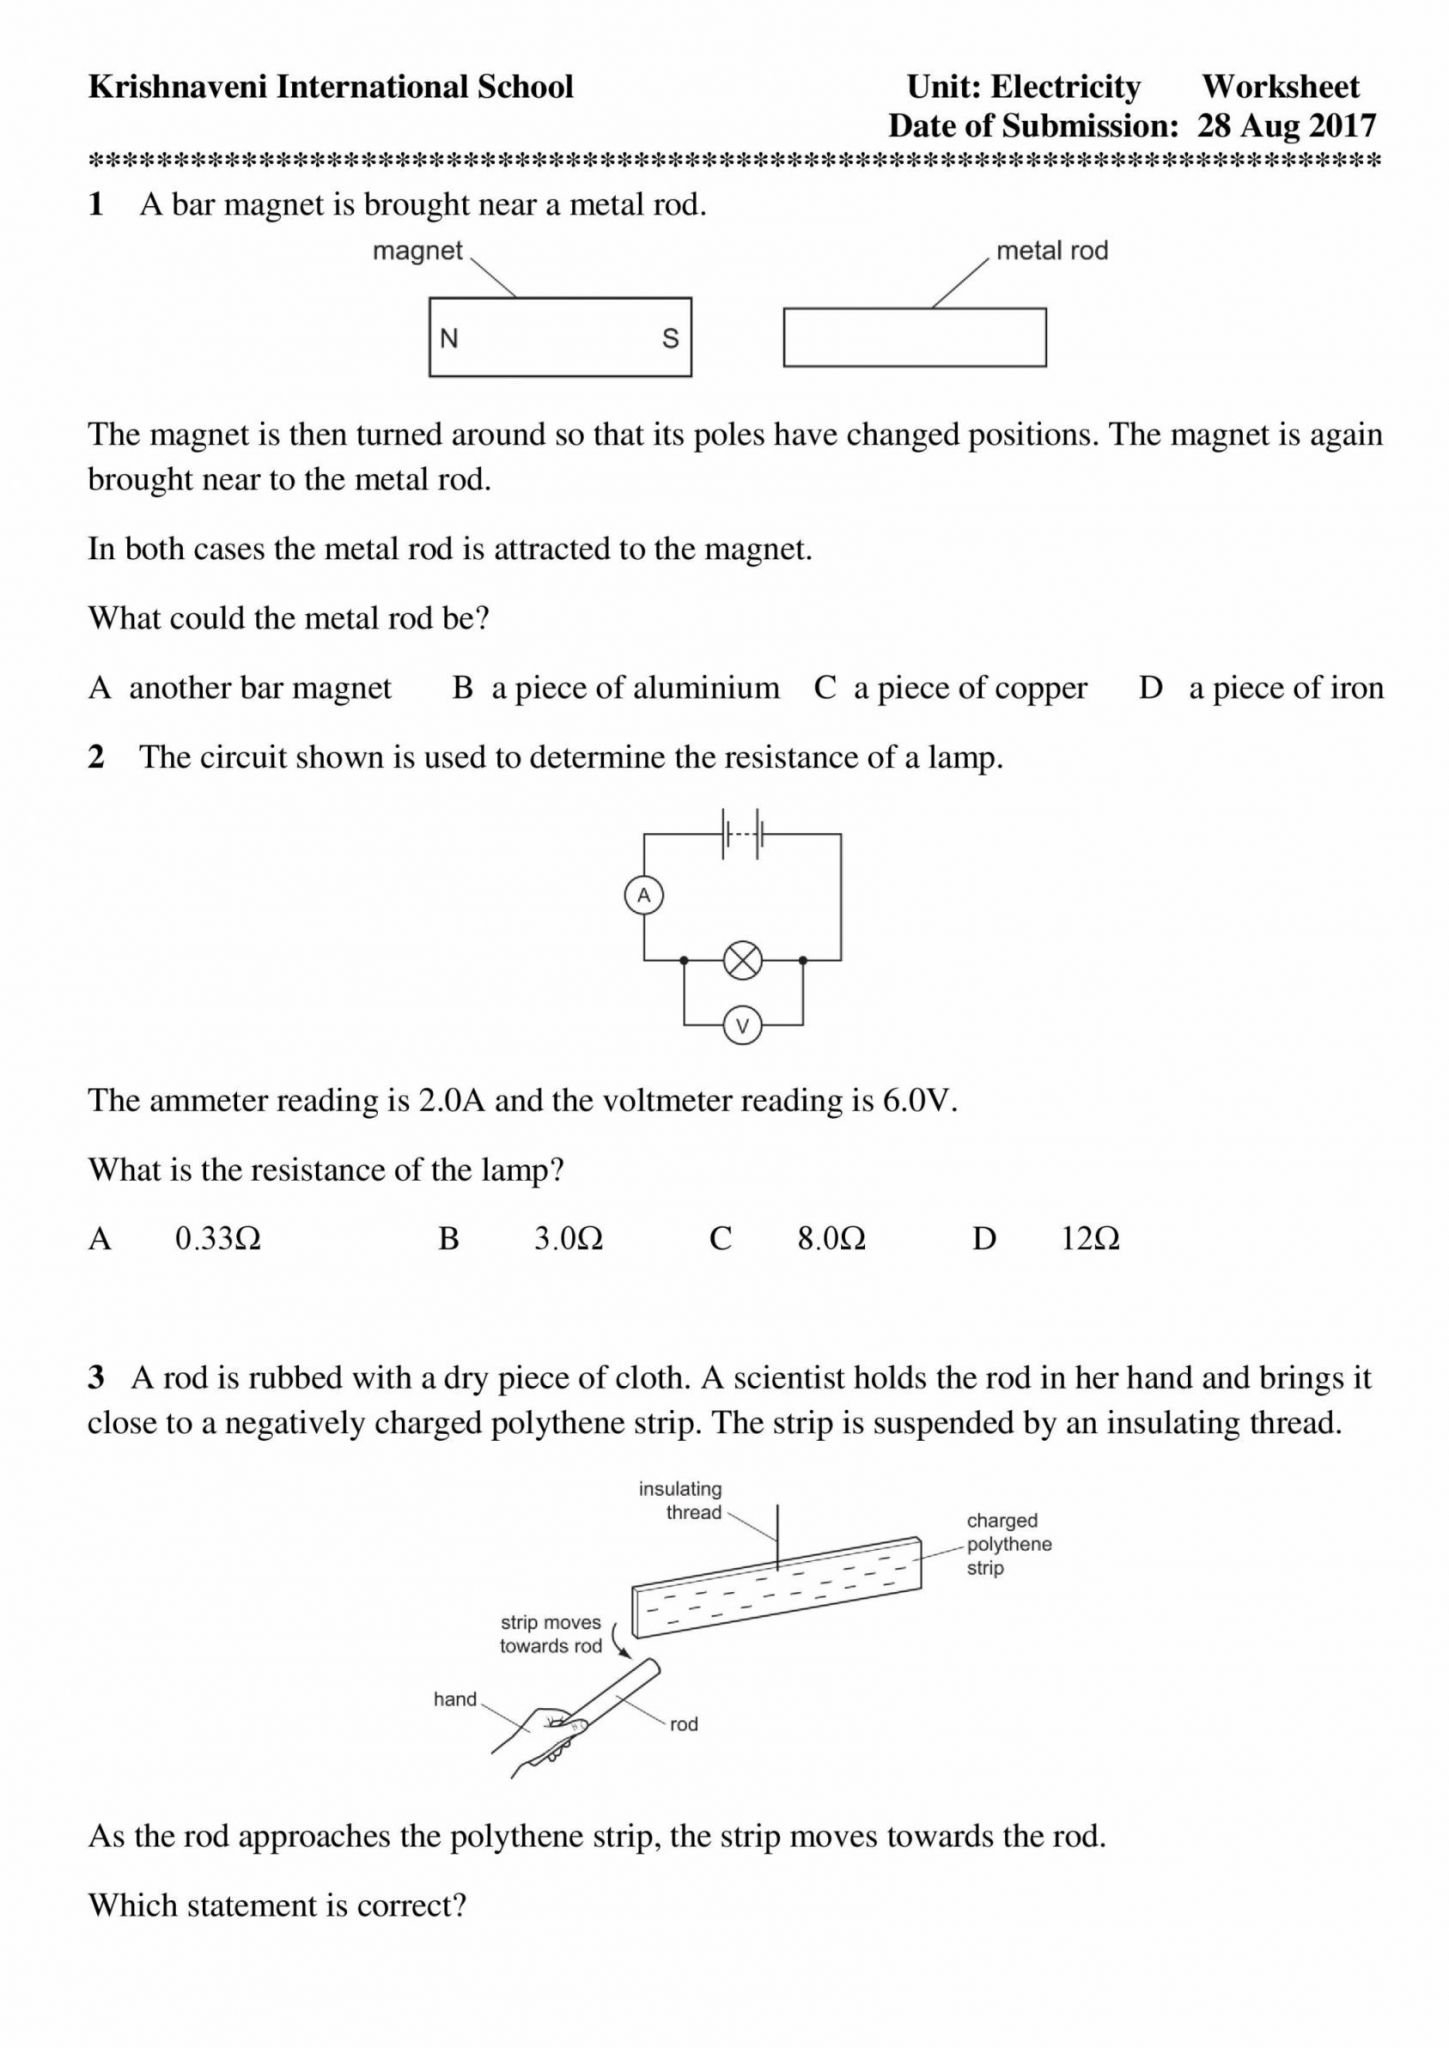 Universal Gravitation Worksheet Physics Classroom Answers Also Work Energy And Power Worksheet Answers Physics Classroom